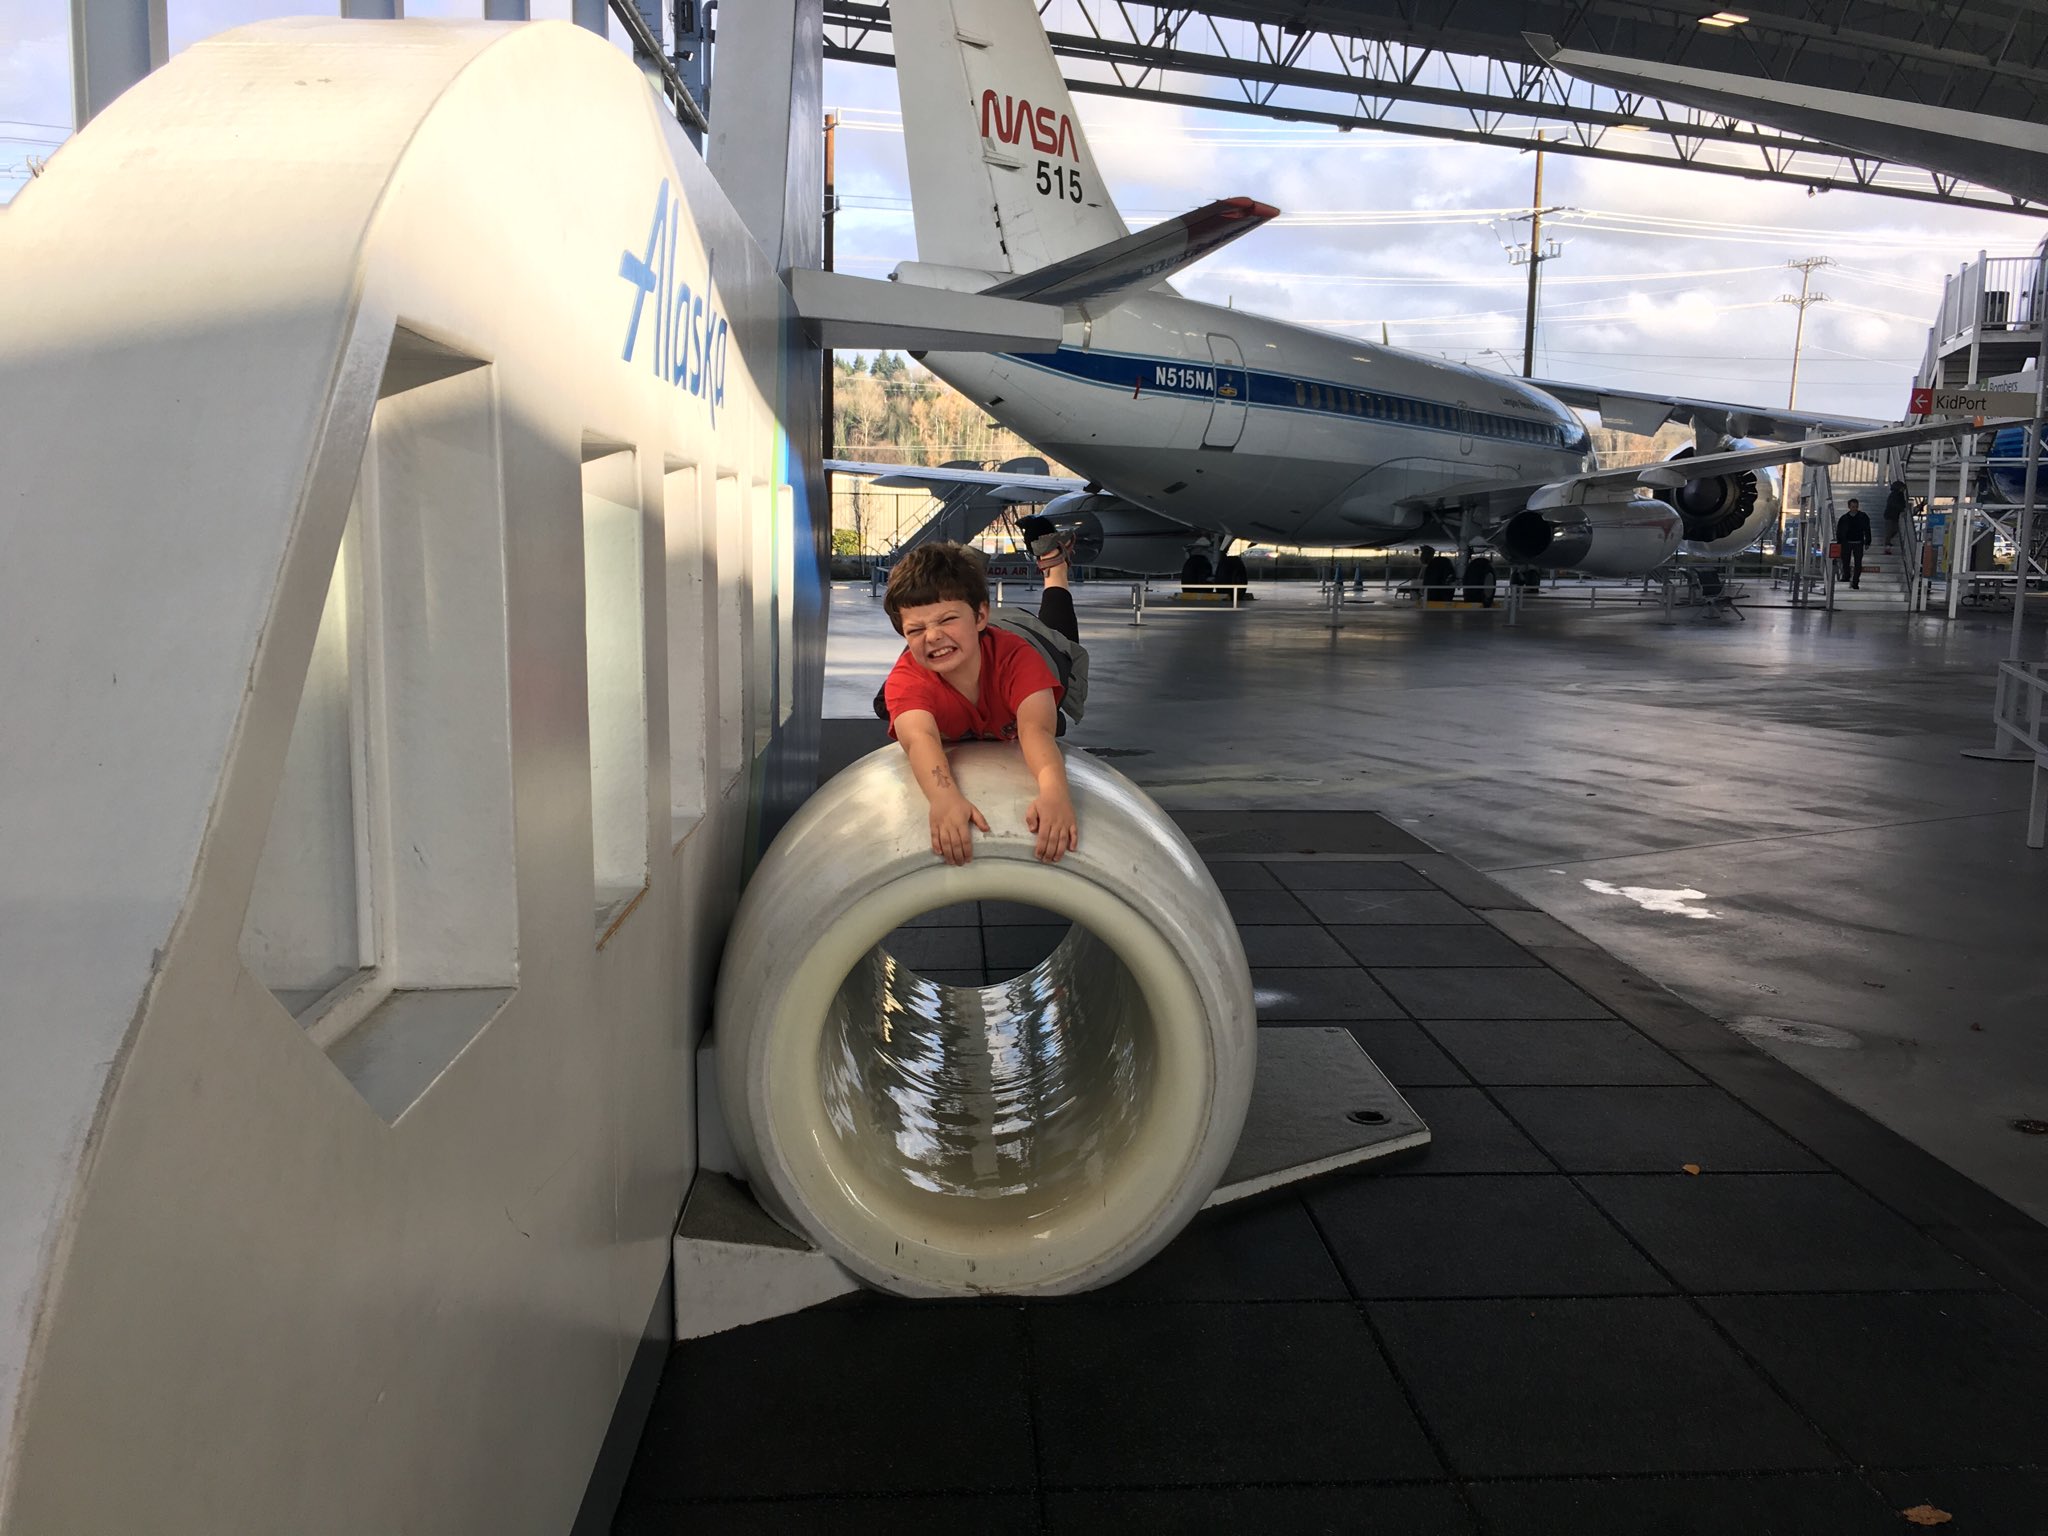 Calvin hanging onto the engine of a large pretend plane.